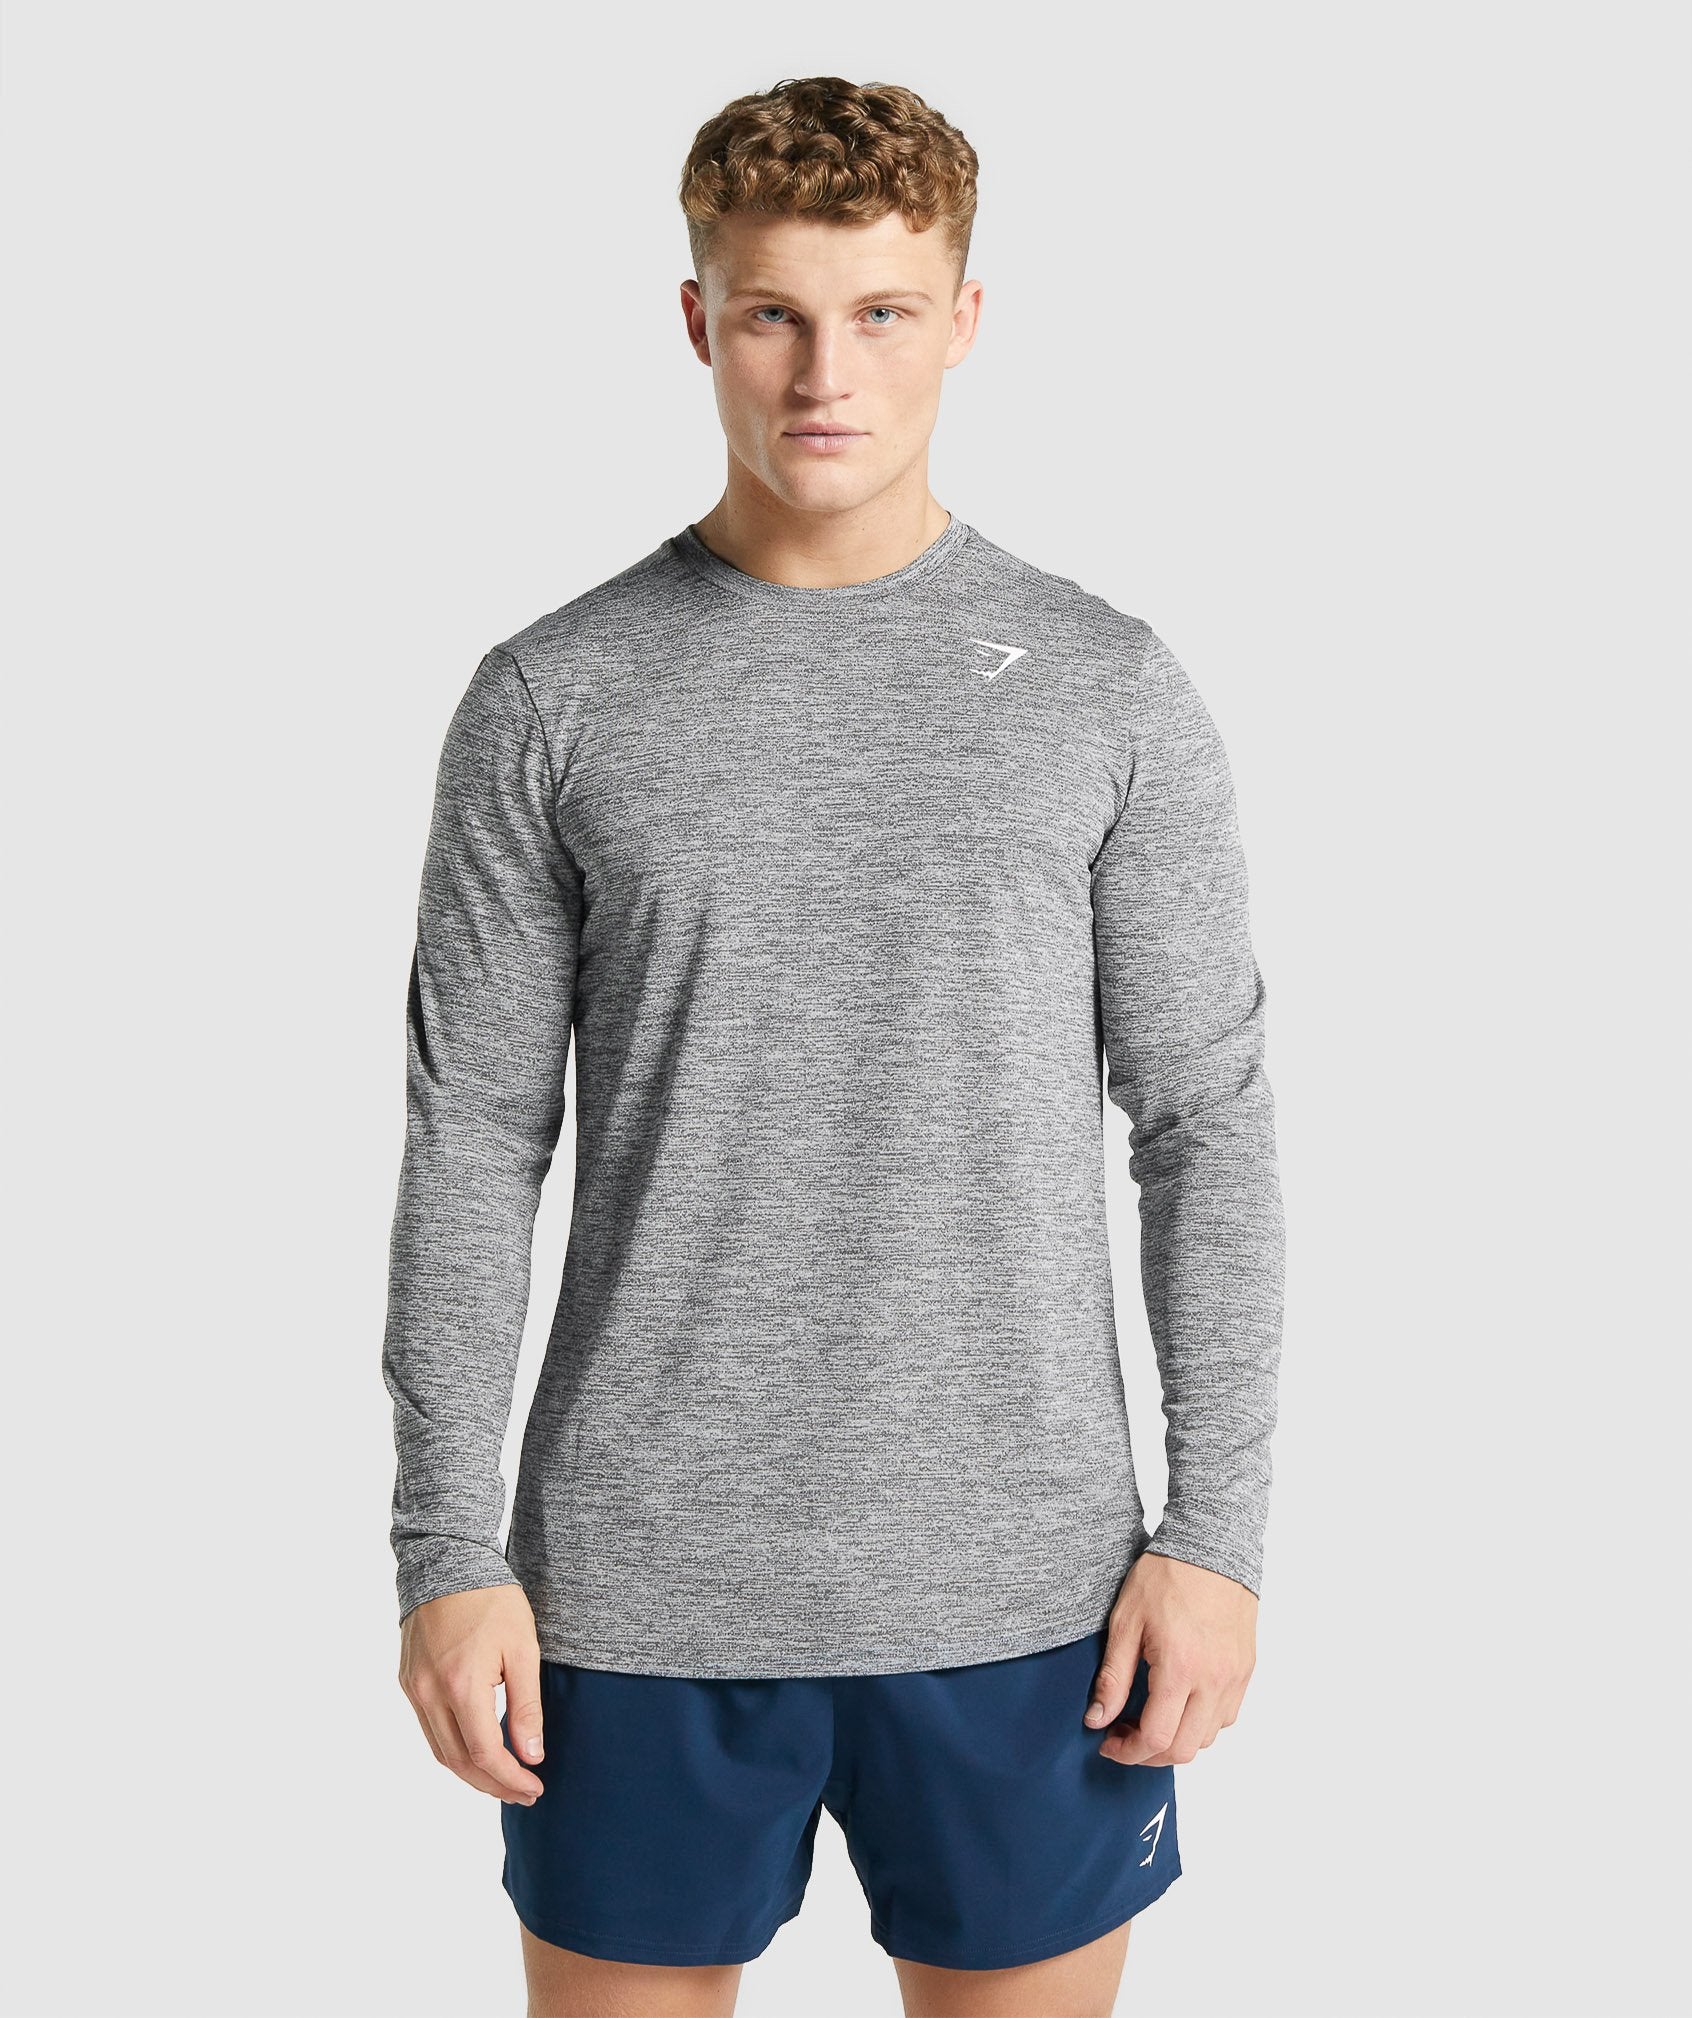 Arrival Marl Long Sleeve T-Shirt in Charcoal Marl - view 1